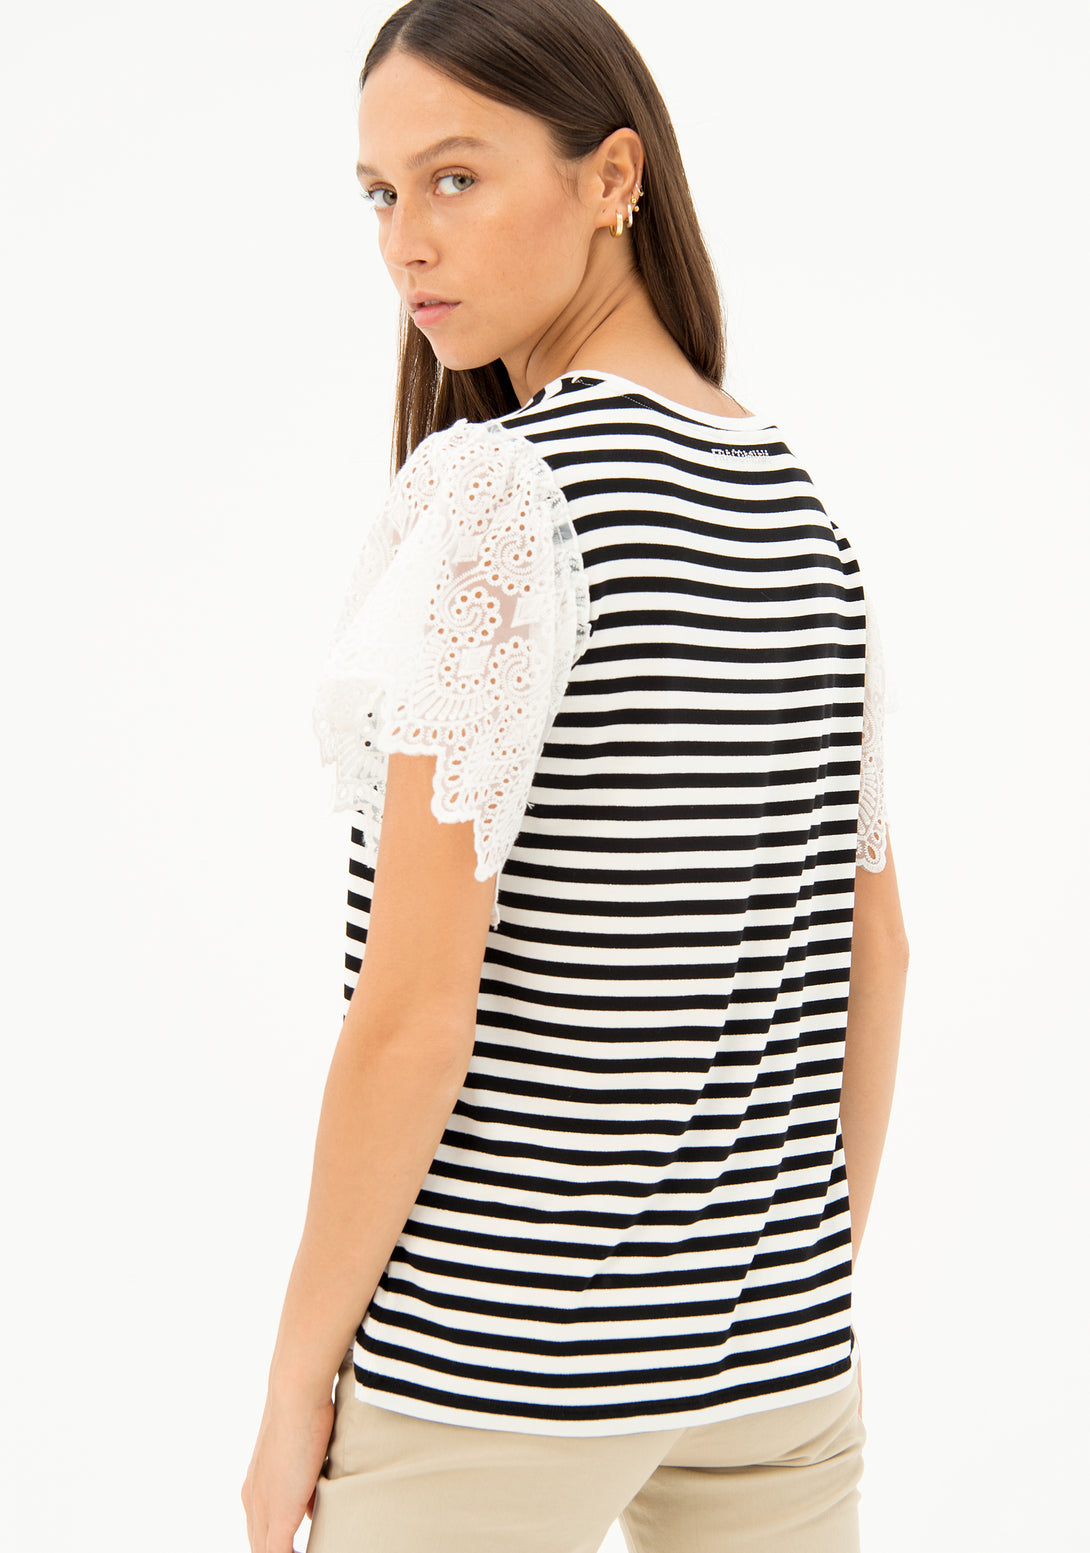 T-shirt wide fit made in striped jersey